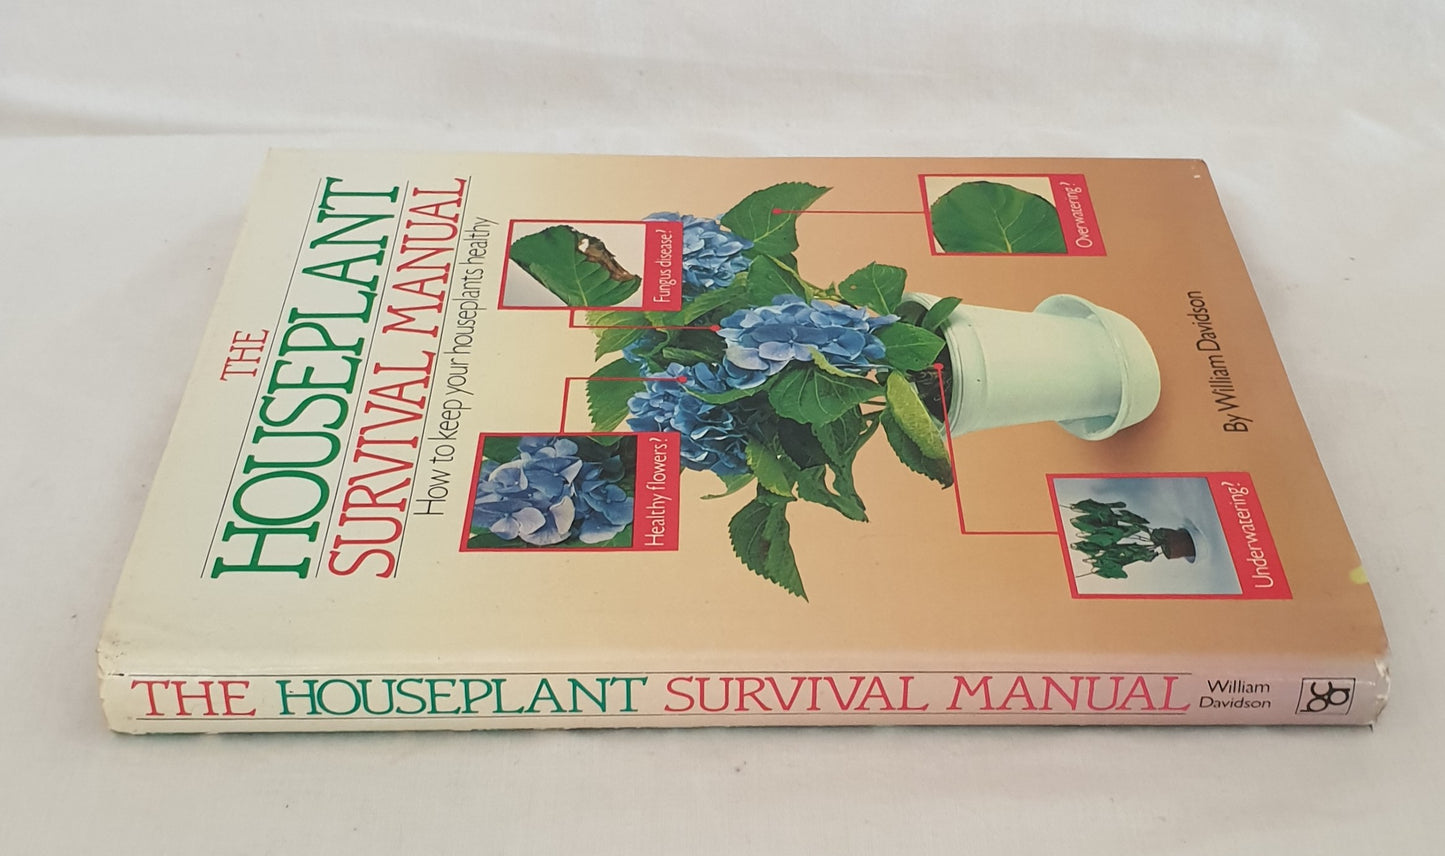 The Houseplant Survival Manual by William Davidson